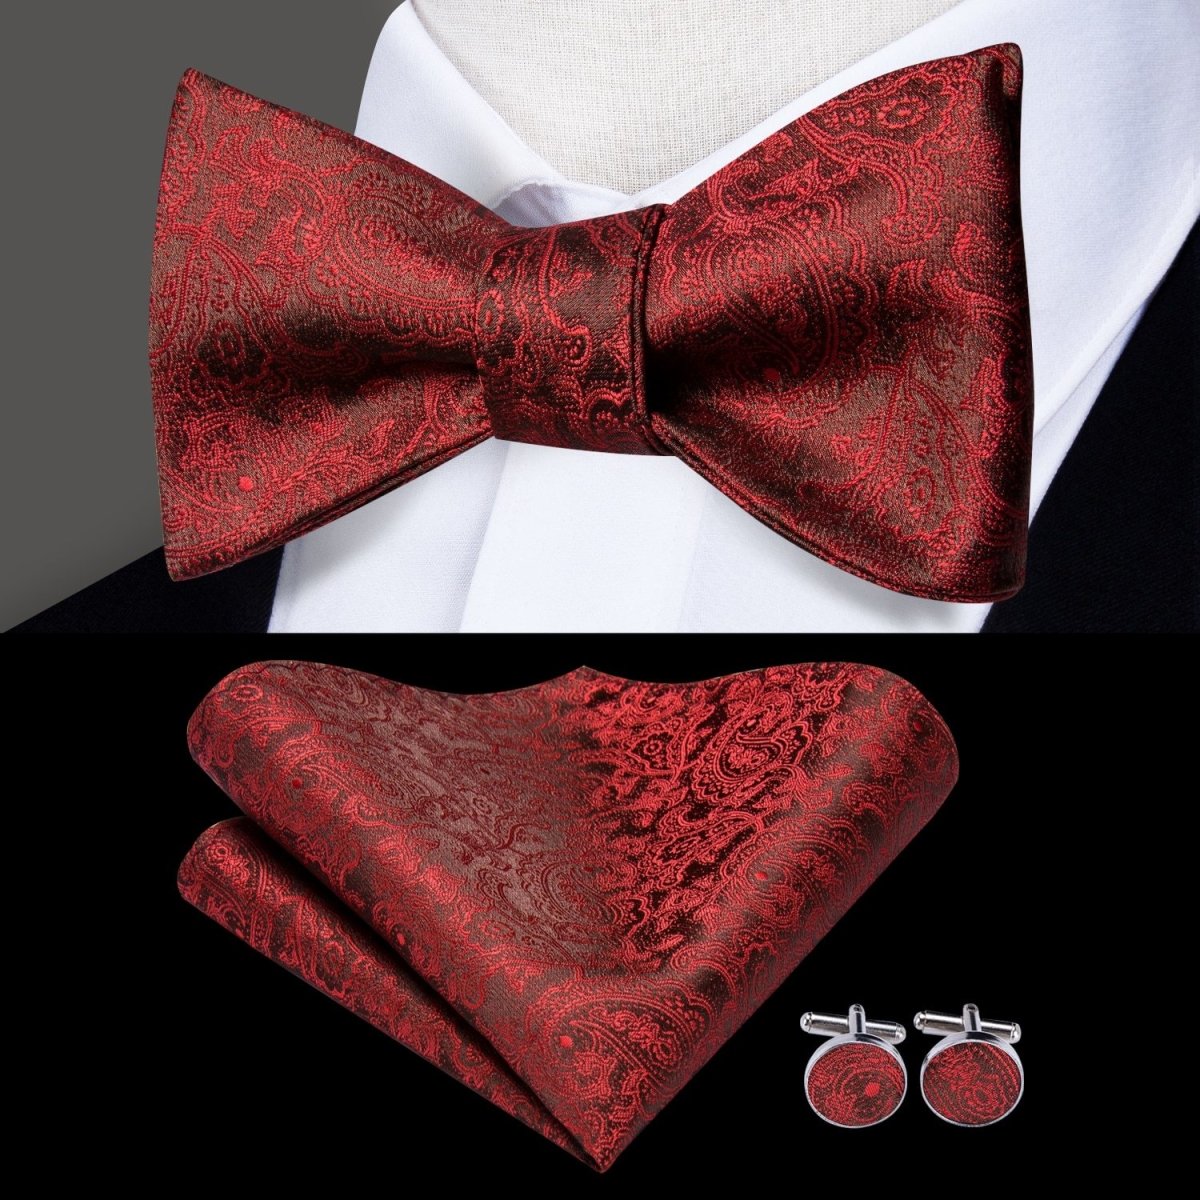 Burgundy Red Paisley Matching Tie Set (3pc) - Modern Mister